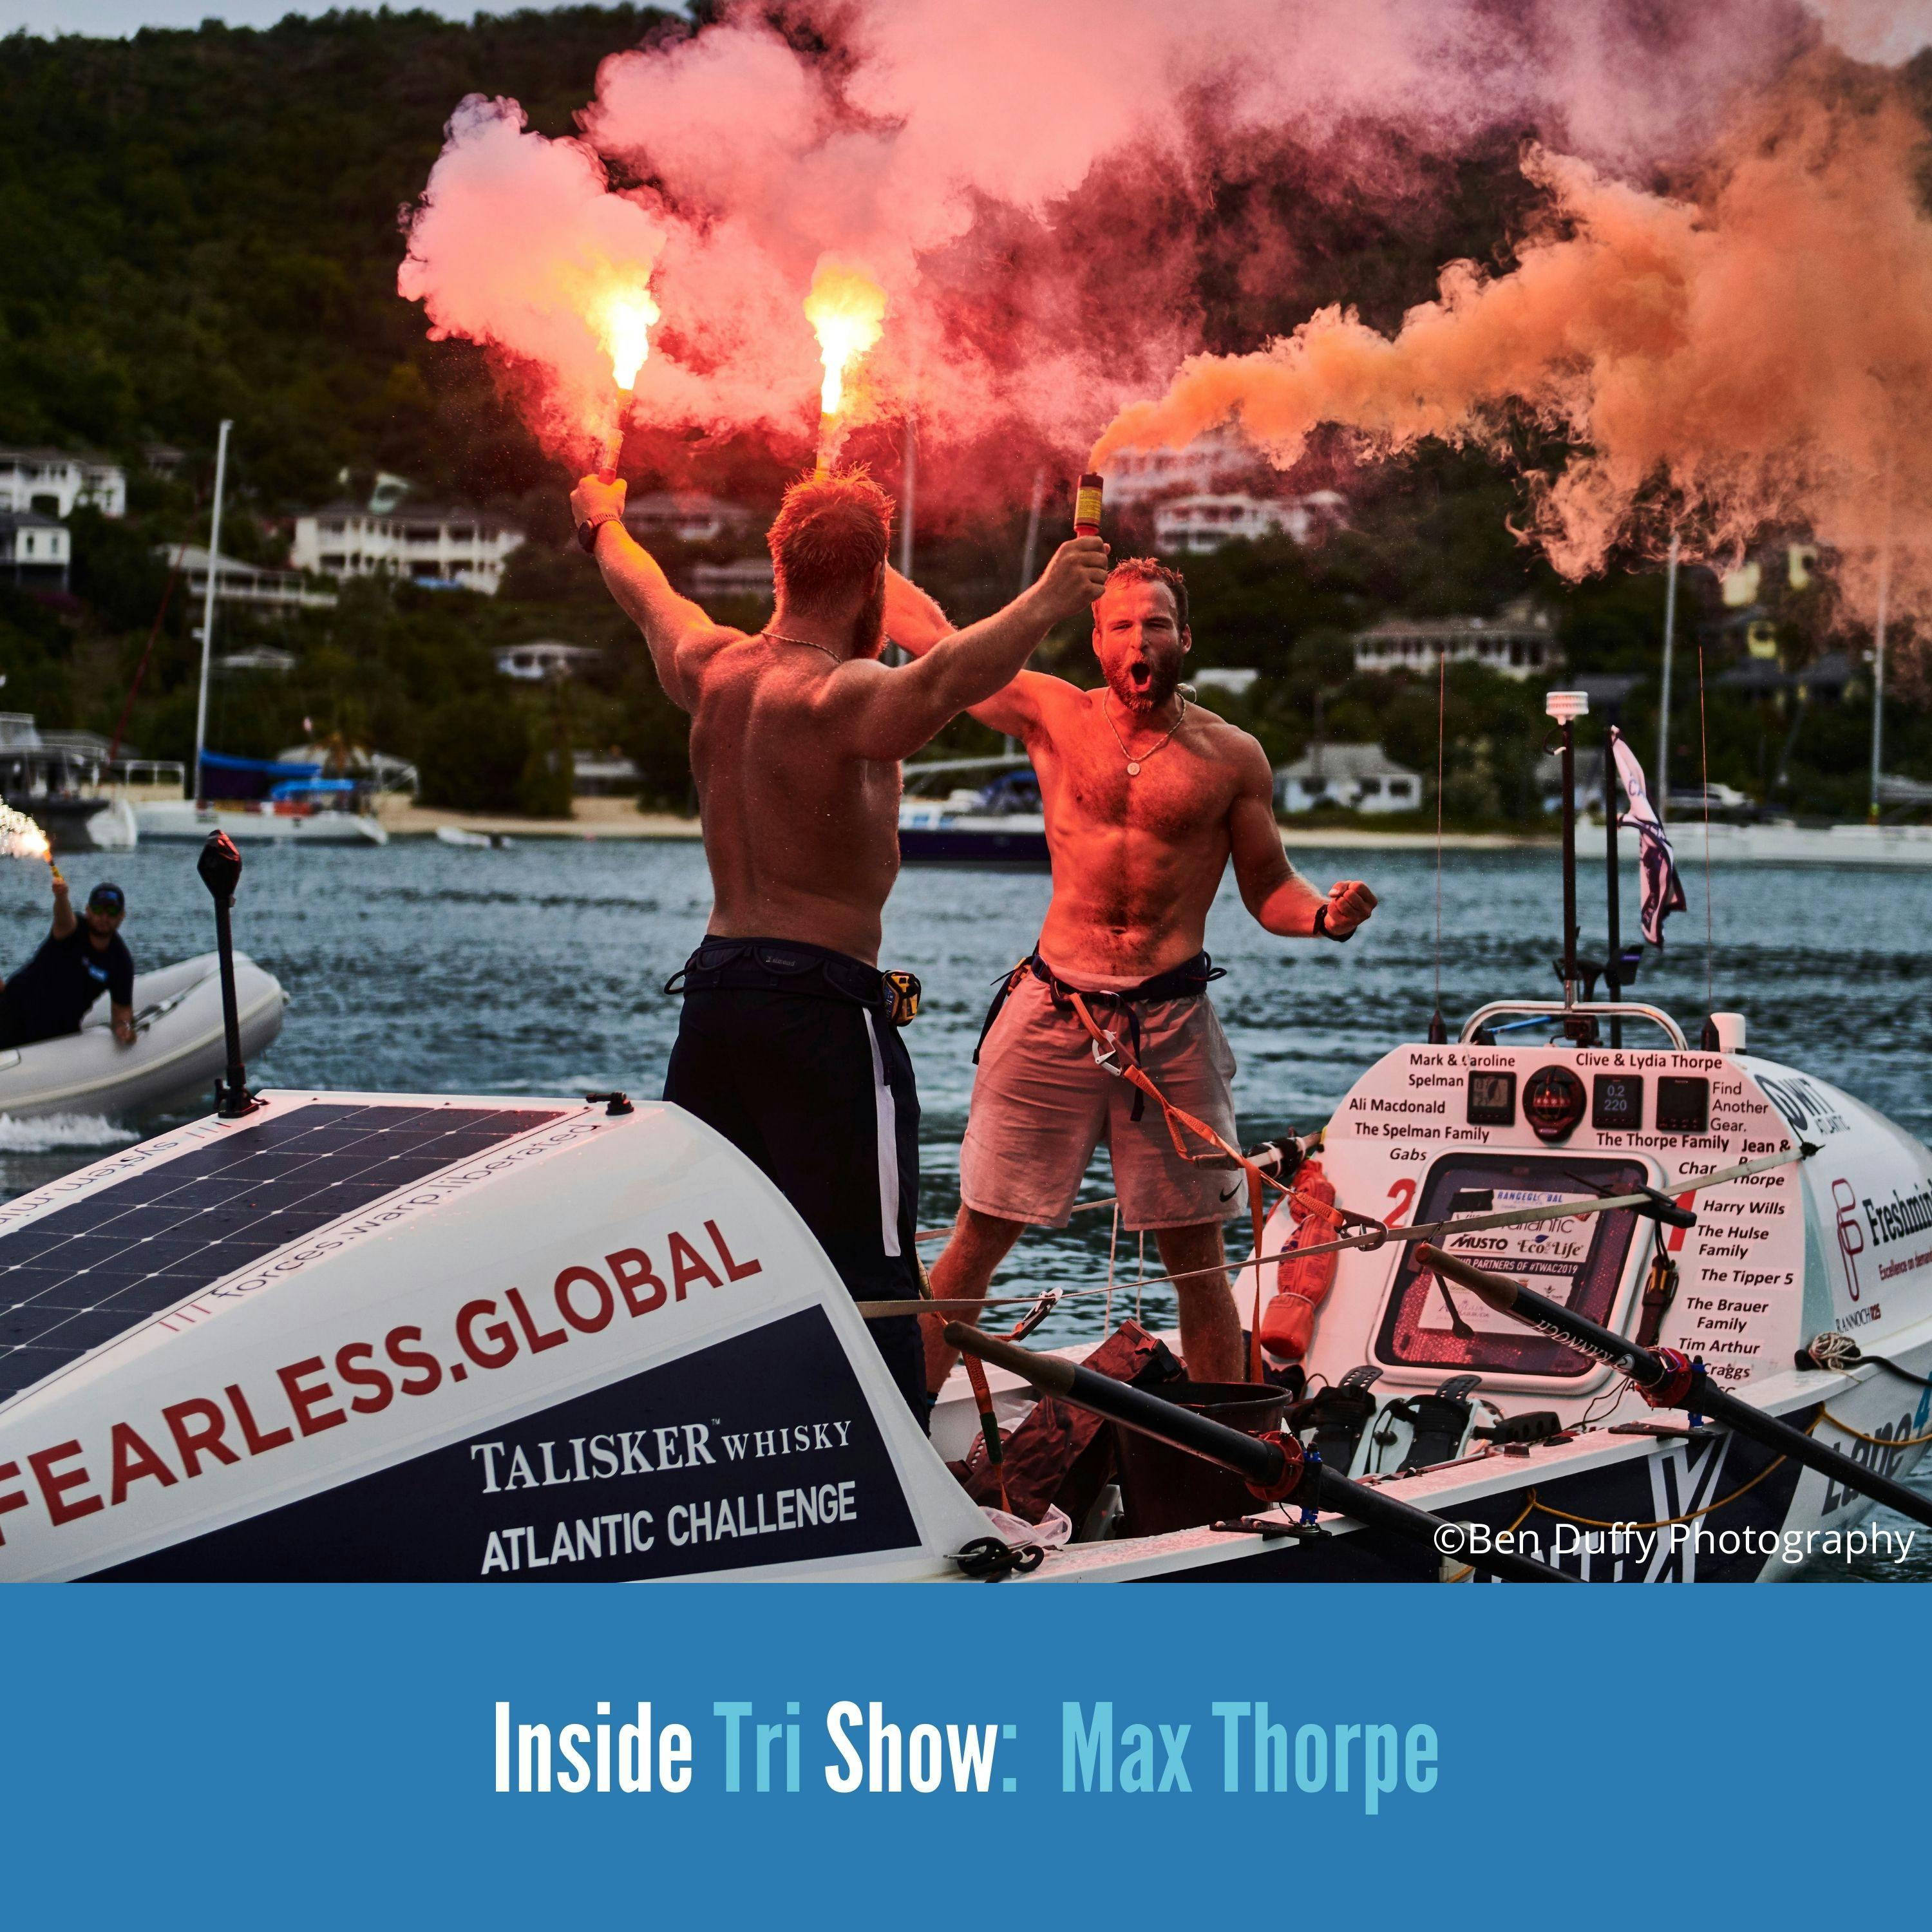 Max Thorpe: Overcoming a near death experience in the Atlantic